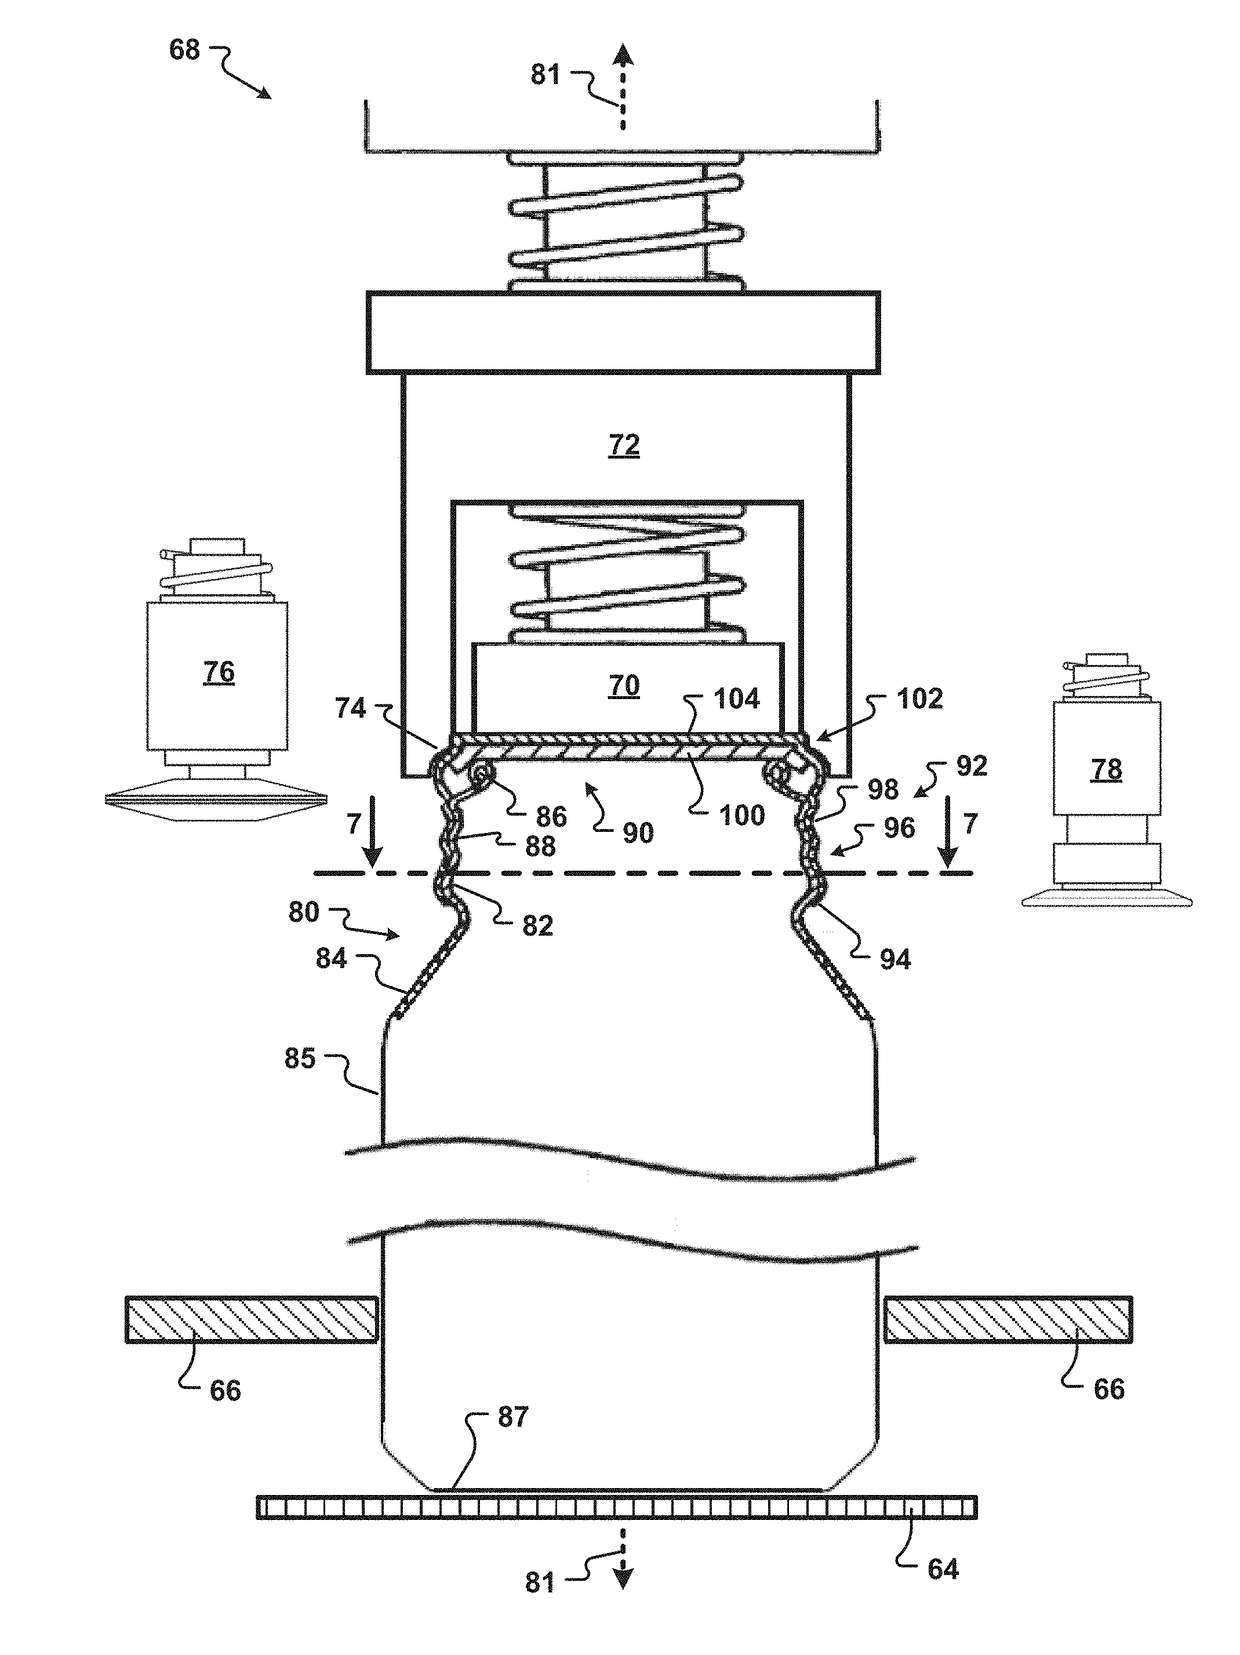 Apparatus and Methods of Capping Metallic Bottles